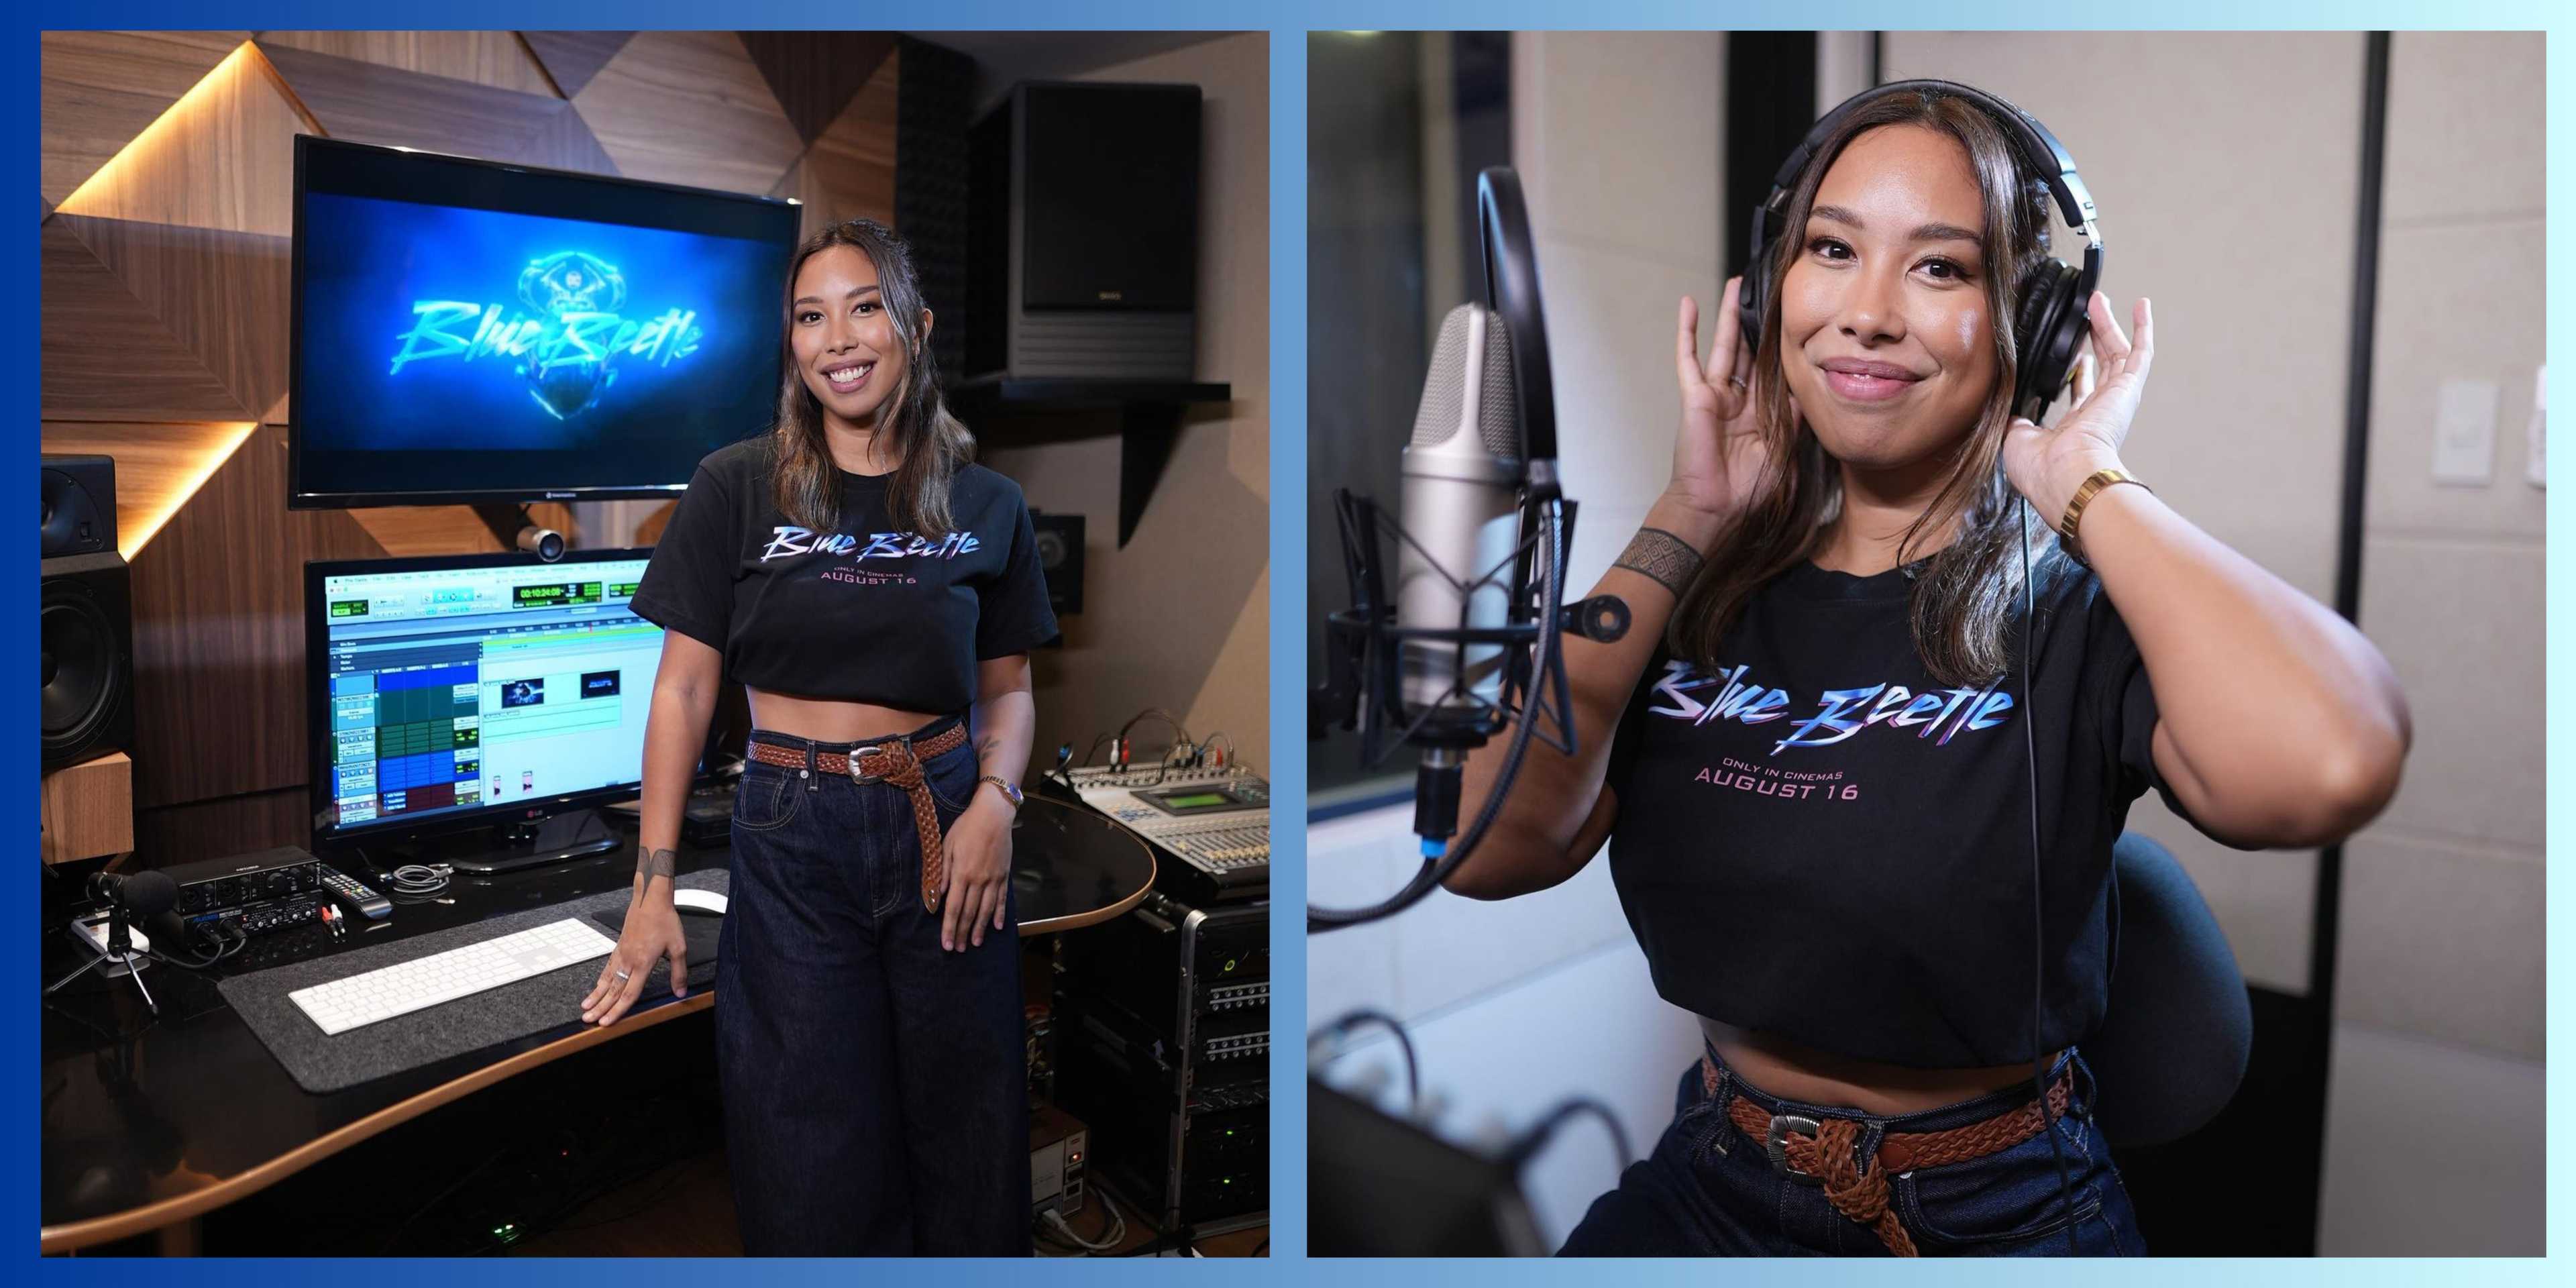 LOOK: Inka Magnaye chosen to voice act character in 'Blue Beetle'